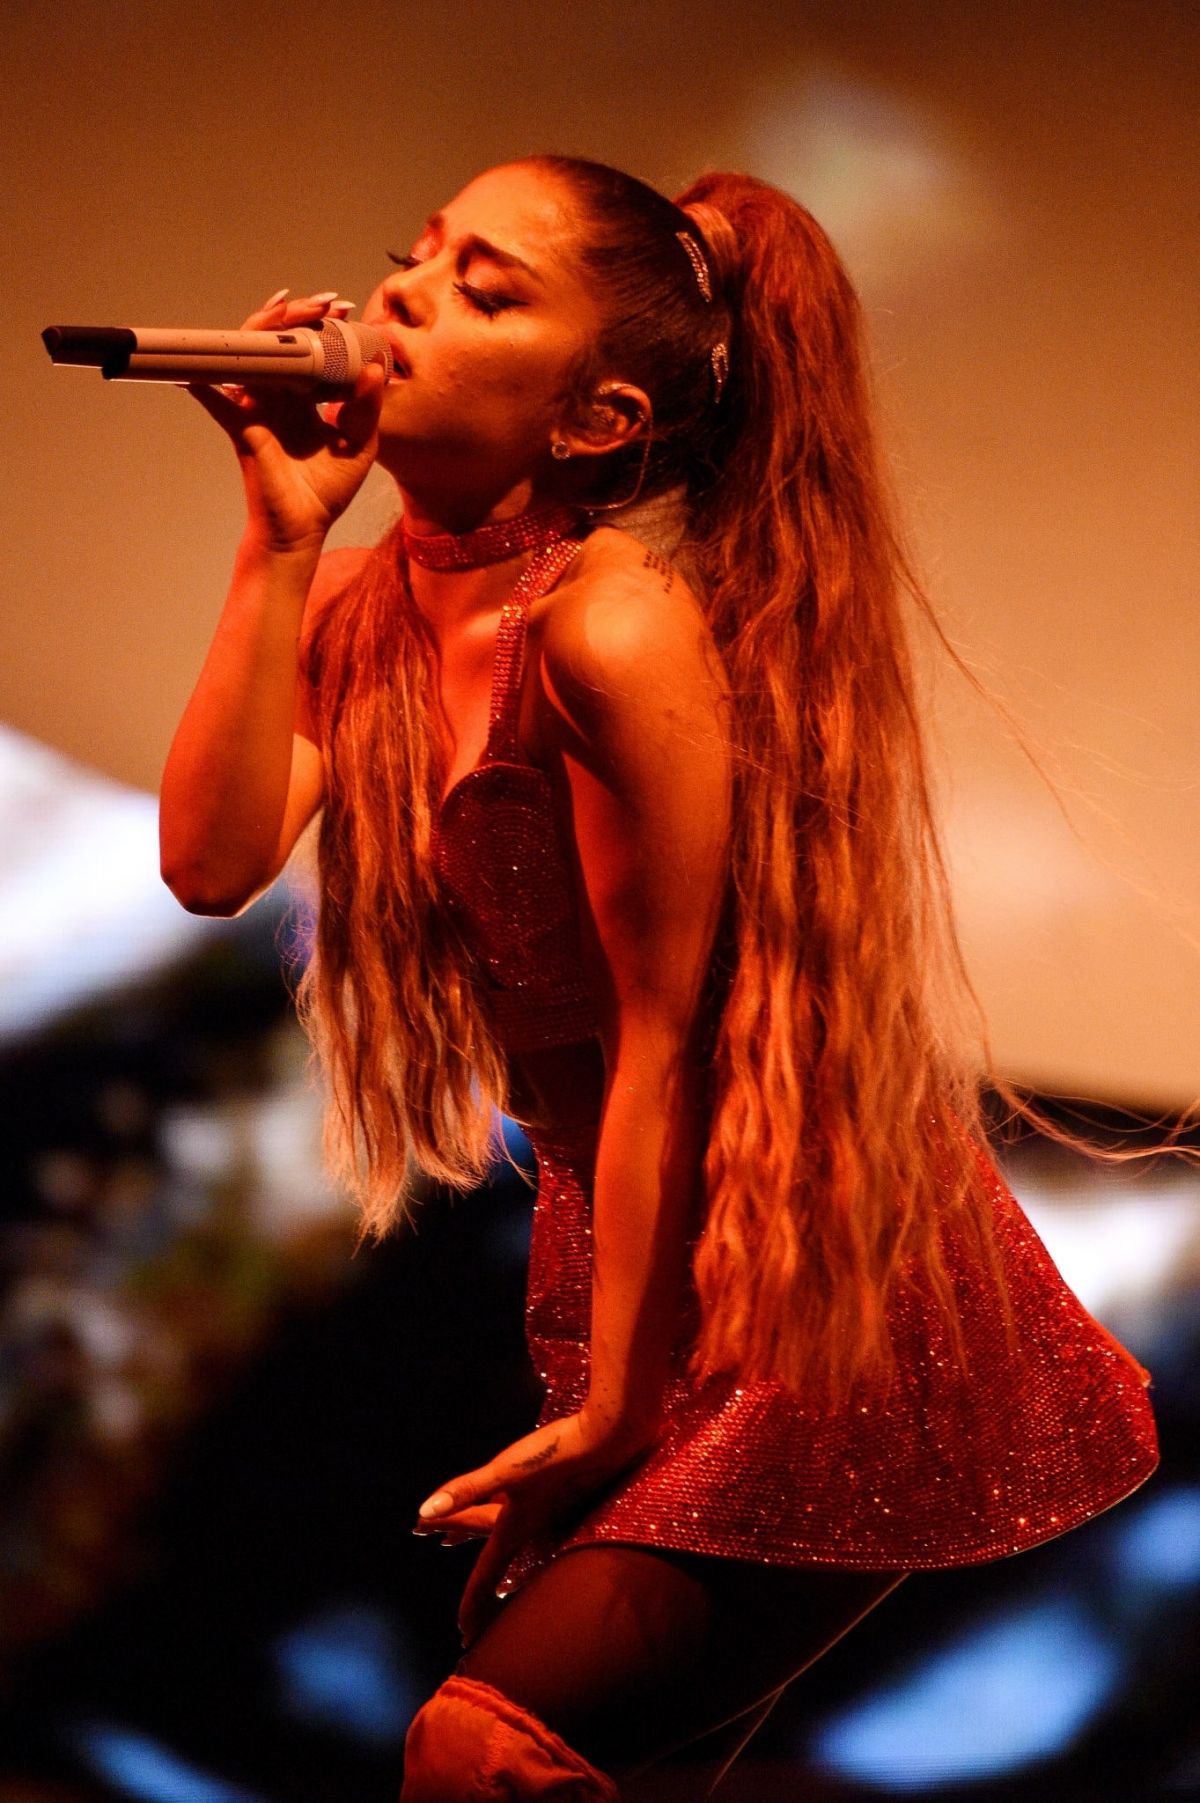 ariana-grande-performs-at-final-night-of-lollapalooza-in-chicago-08-04-2019-2.jpg